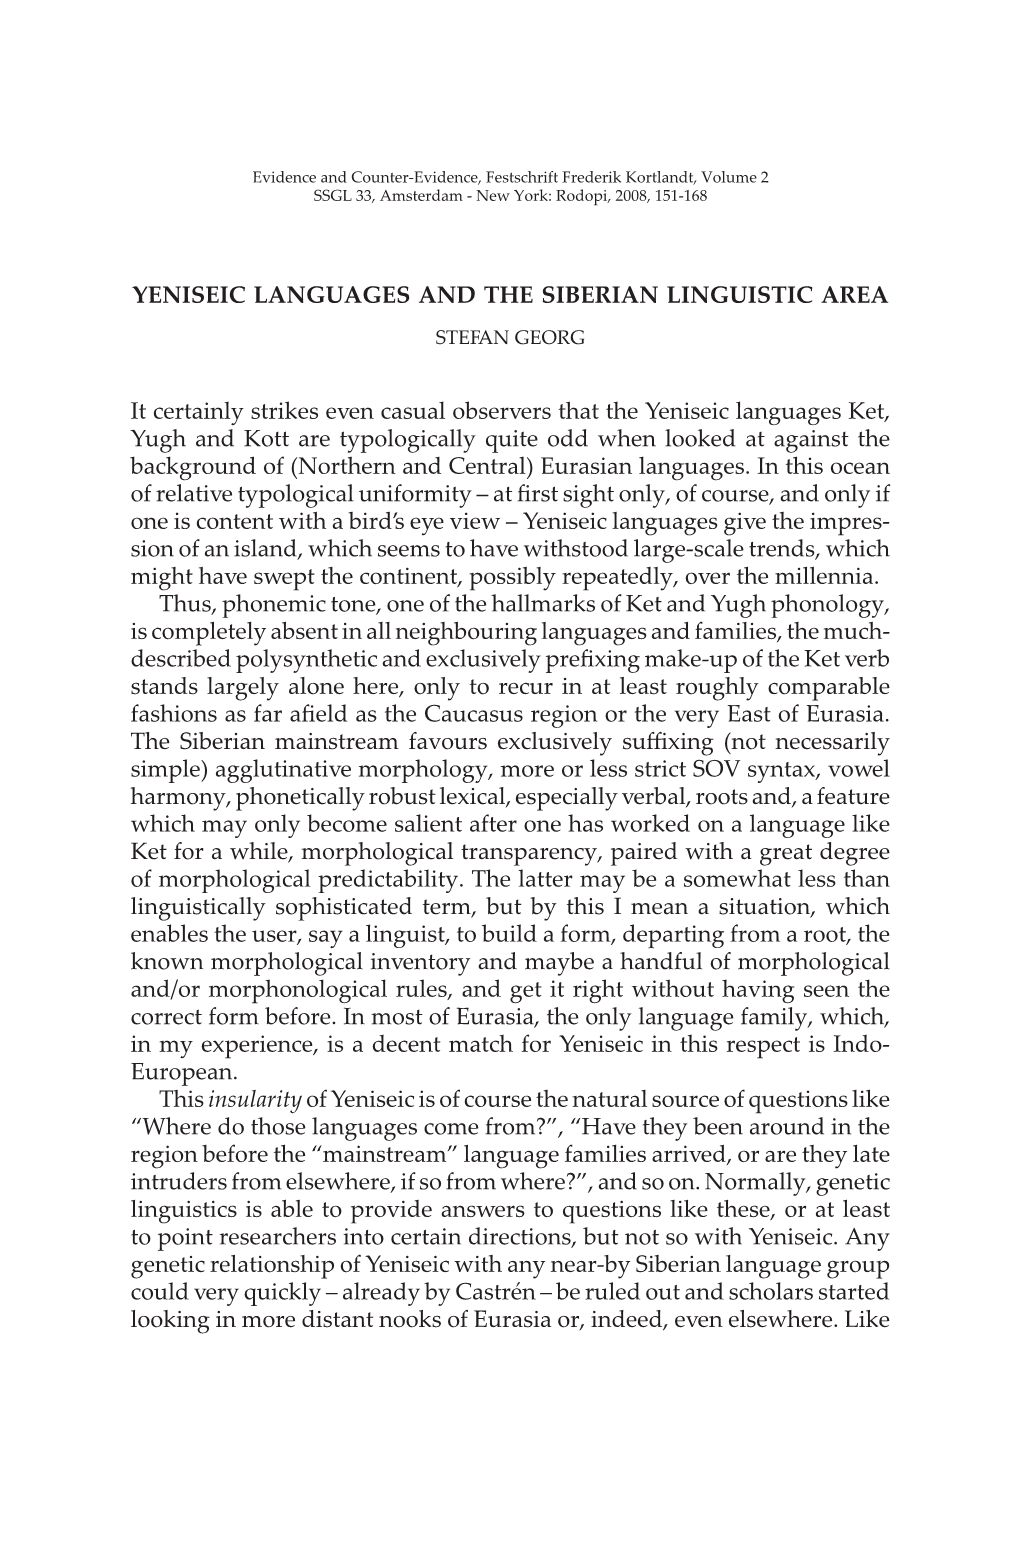 Yeniseic Languages and the Siberian Linguistic Area